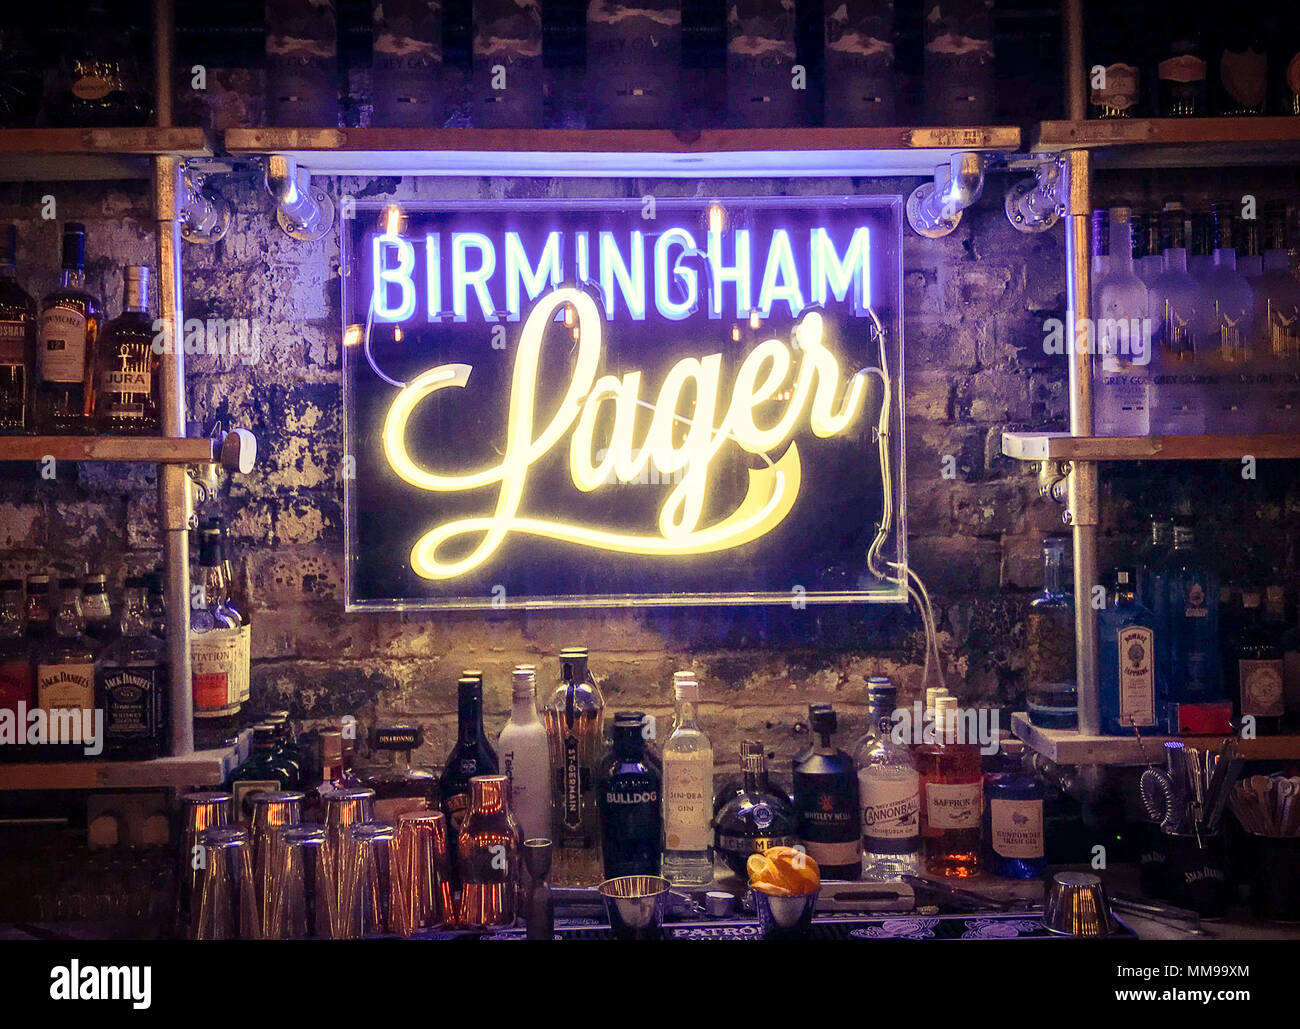 Birmingham Lager sign, from The Indian Brewery, Snow Hill,Birmingham, B3 1EU, England, UK Stock Photo